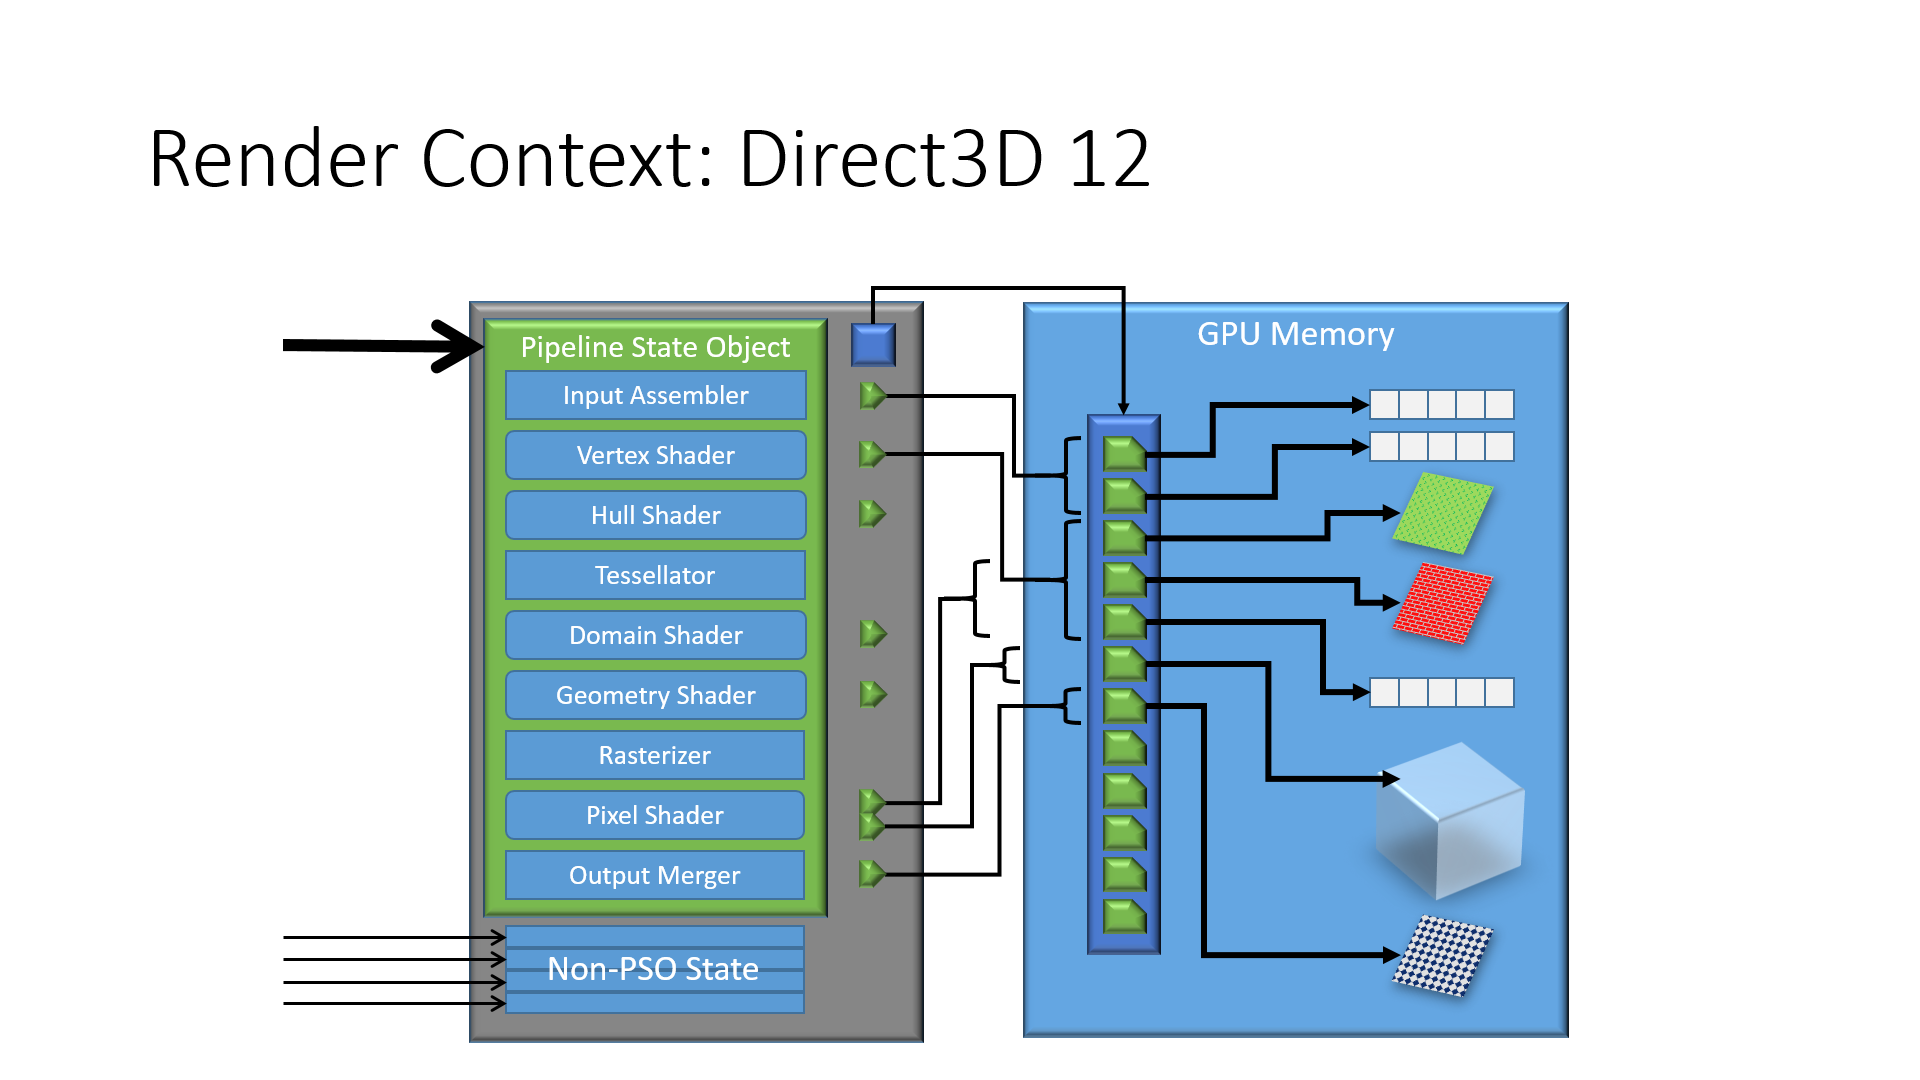 Discussing the State of DirectX 12 With Microsoft & Oxide Games